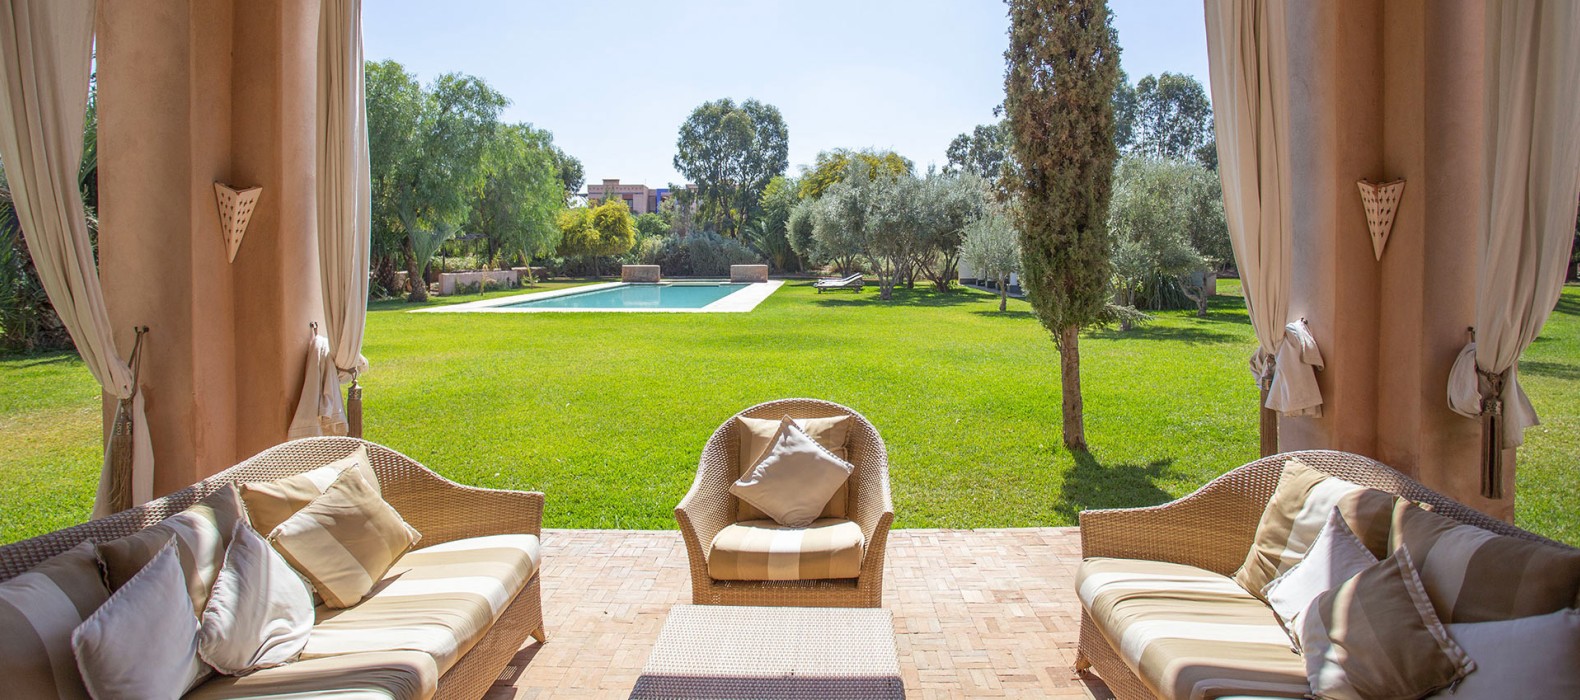 Chill area view of Villa Gauthie in Marrakech